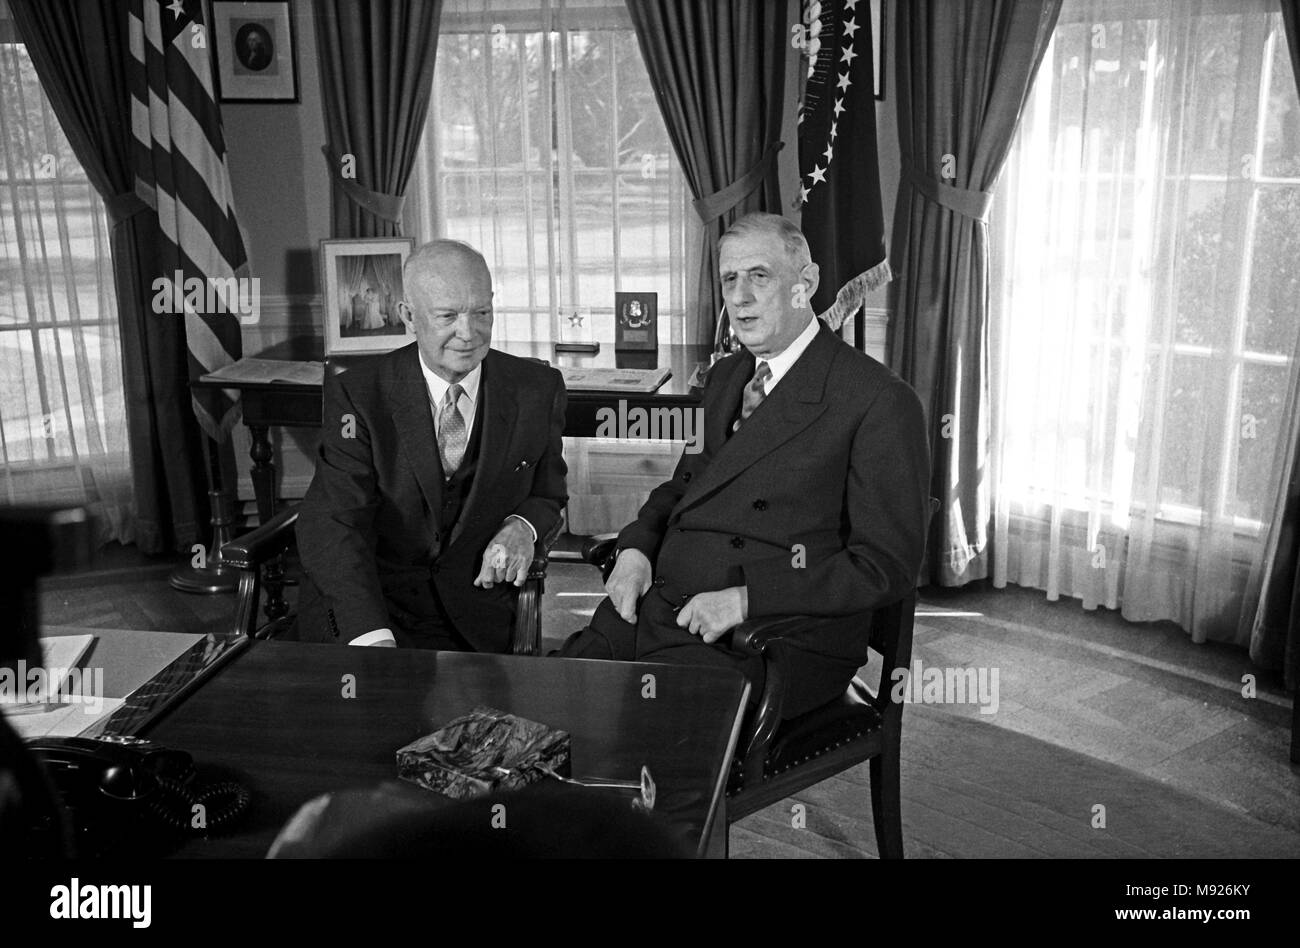 Washington, District of Columbia, USA. 25th Apr, 1960. United States President Dwight D. Eisenhower, left, meets President Charles de Gaulle of France in the Oval Office of the White House in Washington, DC on April 25, 1960.Credit: Benjamin E. ''Gene'' Forte/CNP Credit: Benjamin E. ''Gene'' Forte/CNP/ZUMA Wire/Alamy Live News Stock Photo